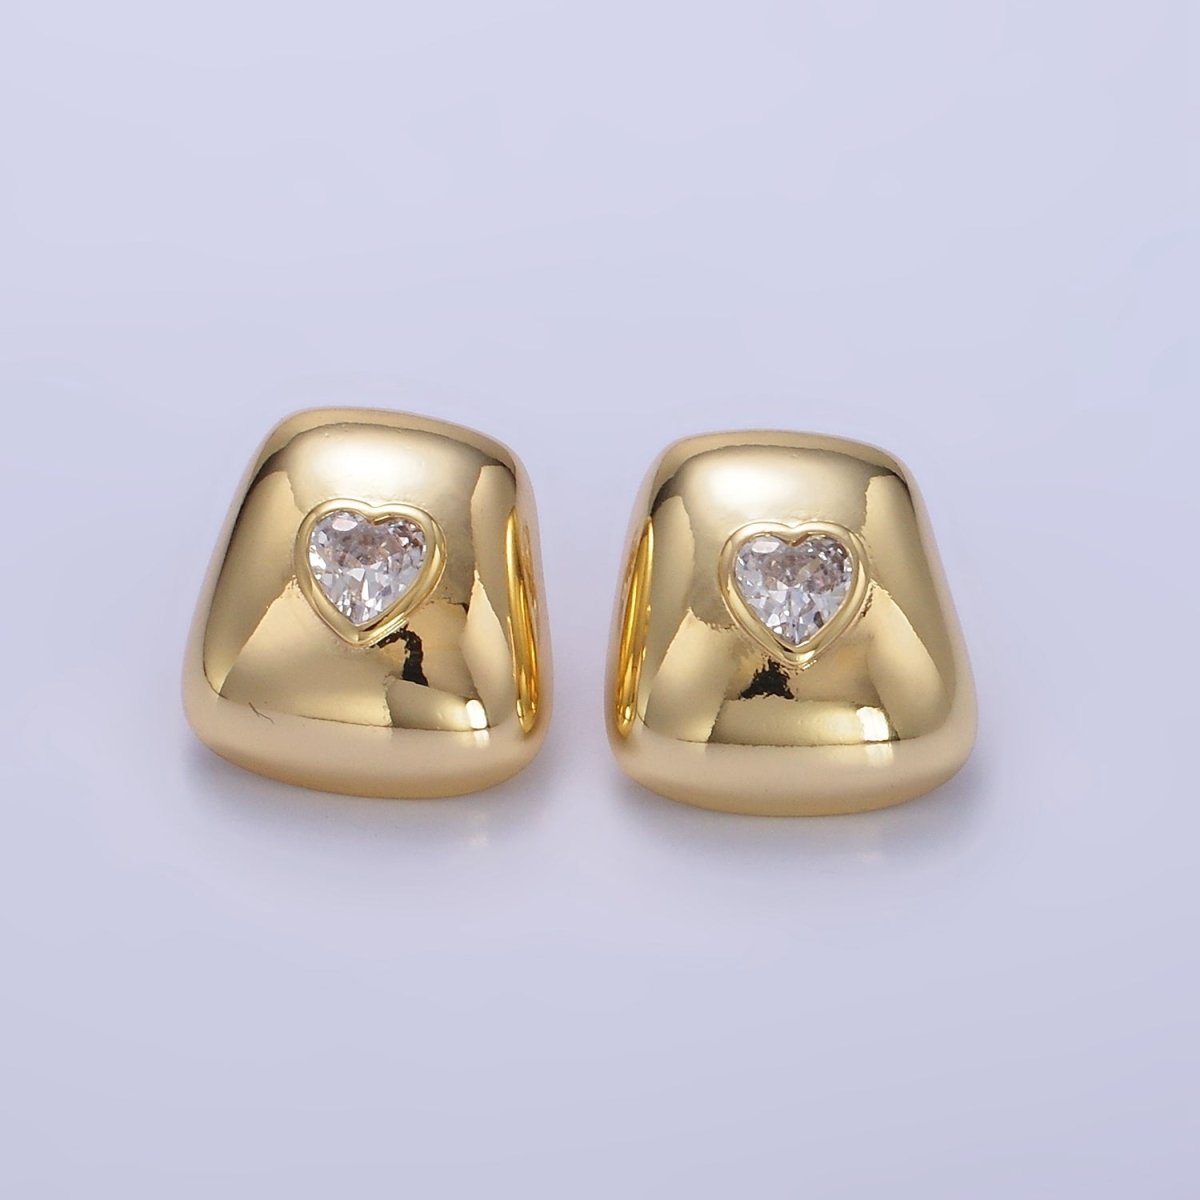 14K Gold Filled Heart CZ Square Dome Stud Earrings in Gold & Silver | Q312 Q313 - DLUXCA